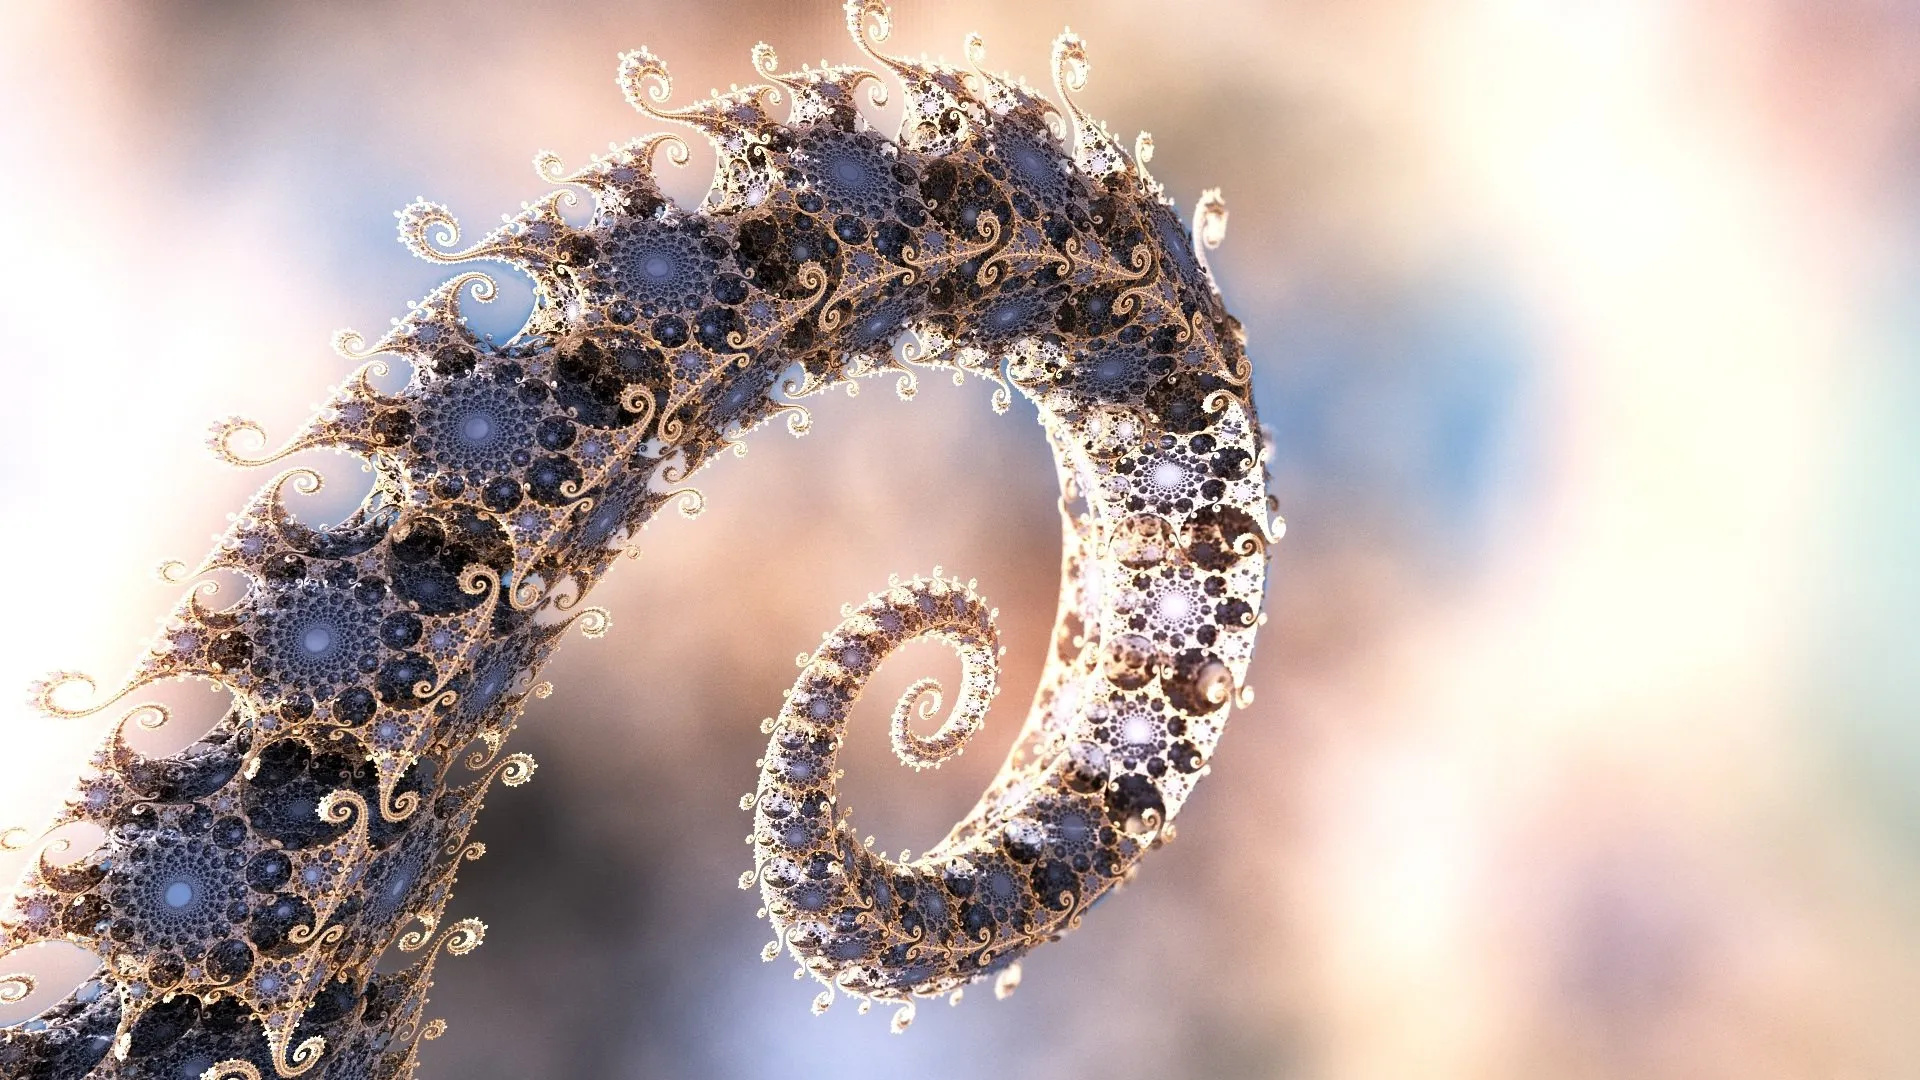 Remarkable fractal patterns, Captivating visuals, Space-inspired designs, Artistic wallpapers, 1920x1080 Full HD Desktop